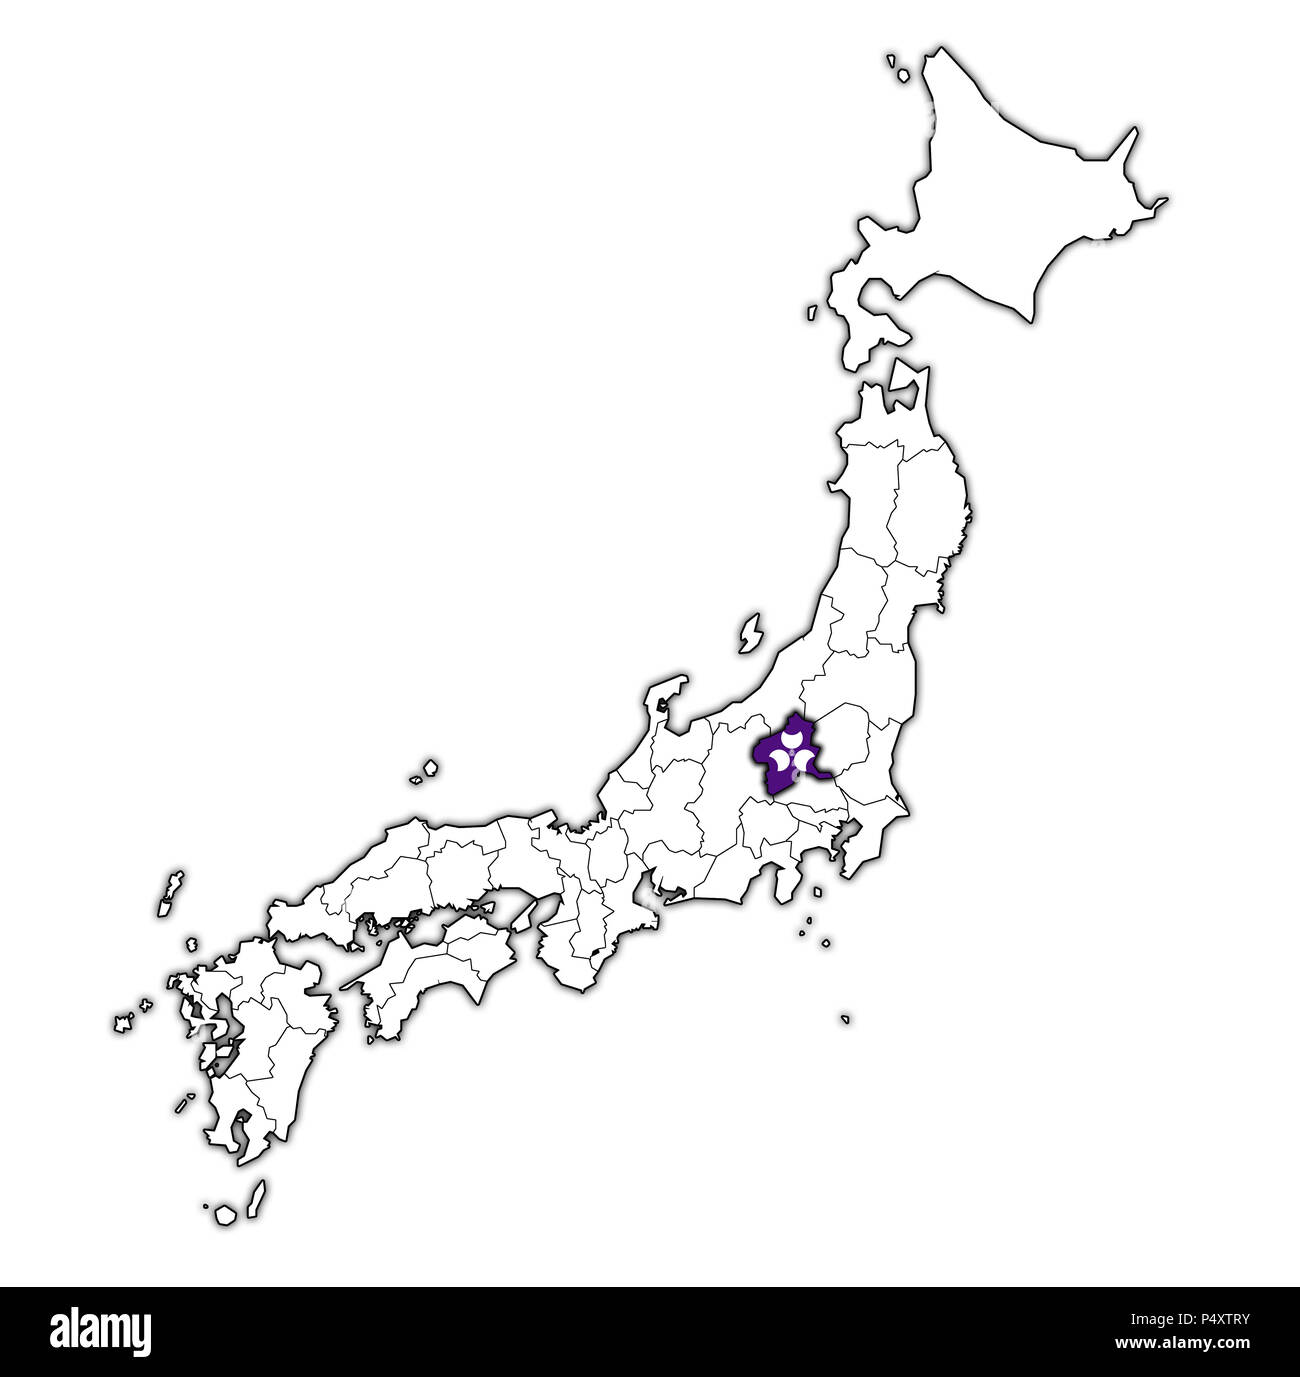 flag of gunma prefecture on map with administrative divisions and borders of japan Stock Photo